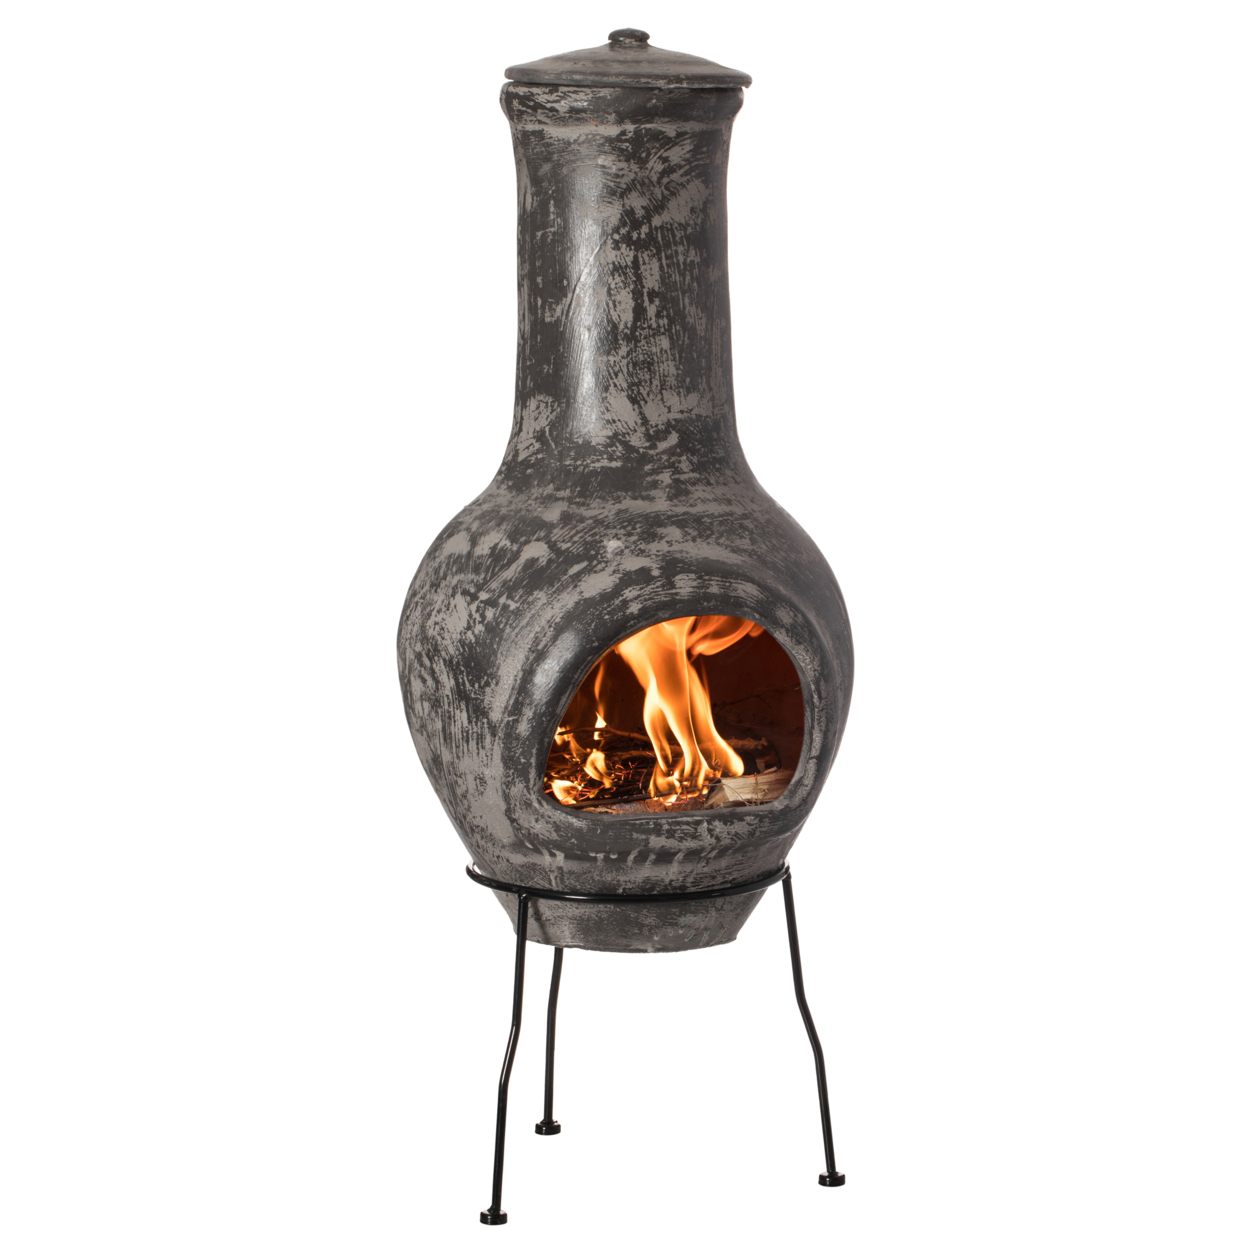 Gray Outdoor Clay Chiminea Fireplace Stoney Scribbled Design Charcoal Burning Fire Pit With Sturdy Metal Stand, Barbecue, Cocktail Party